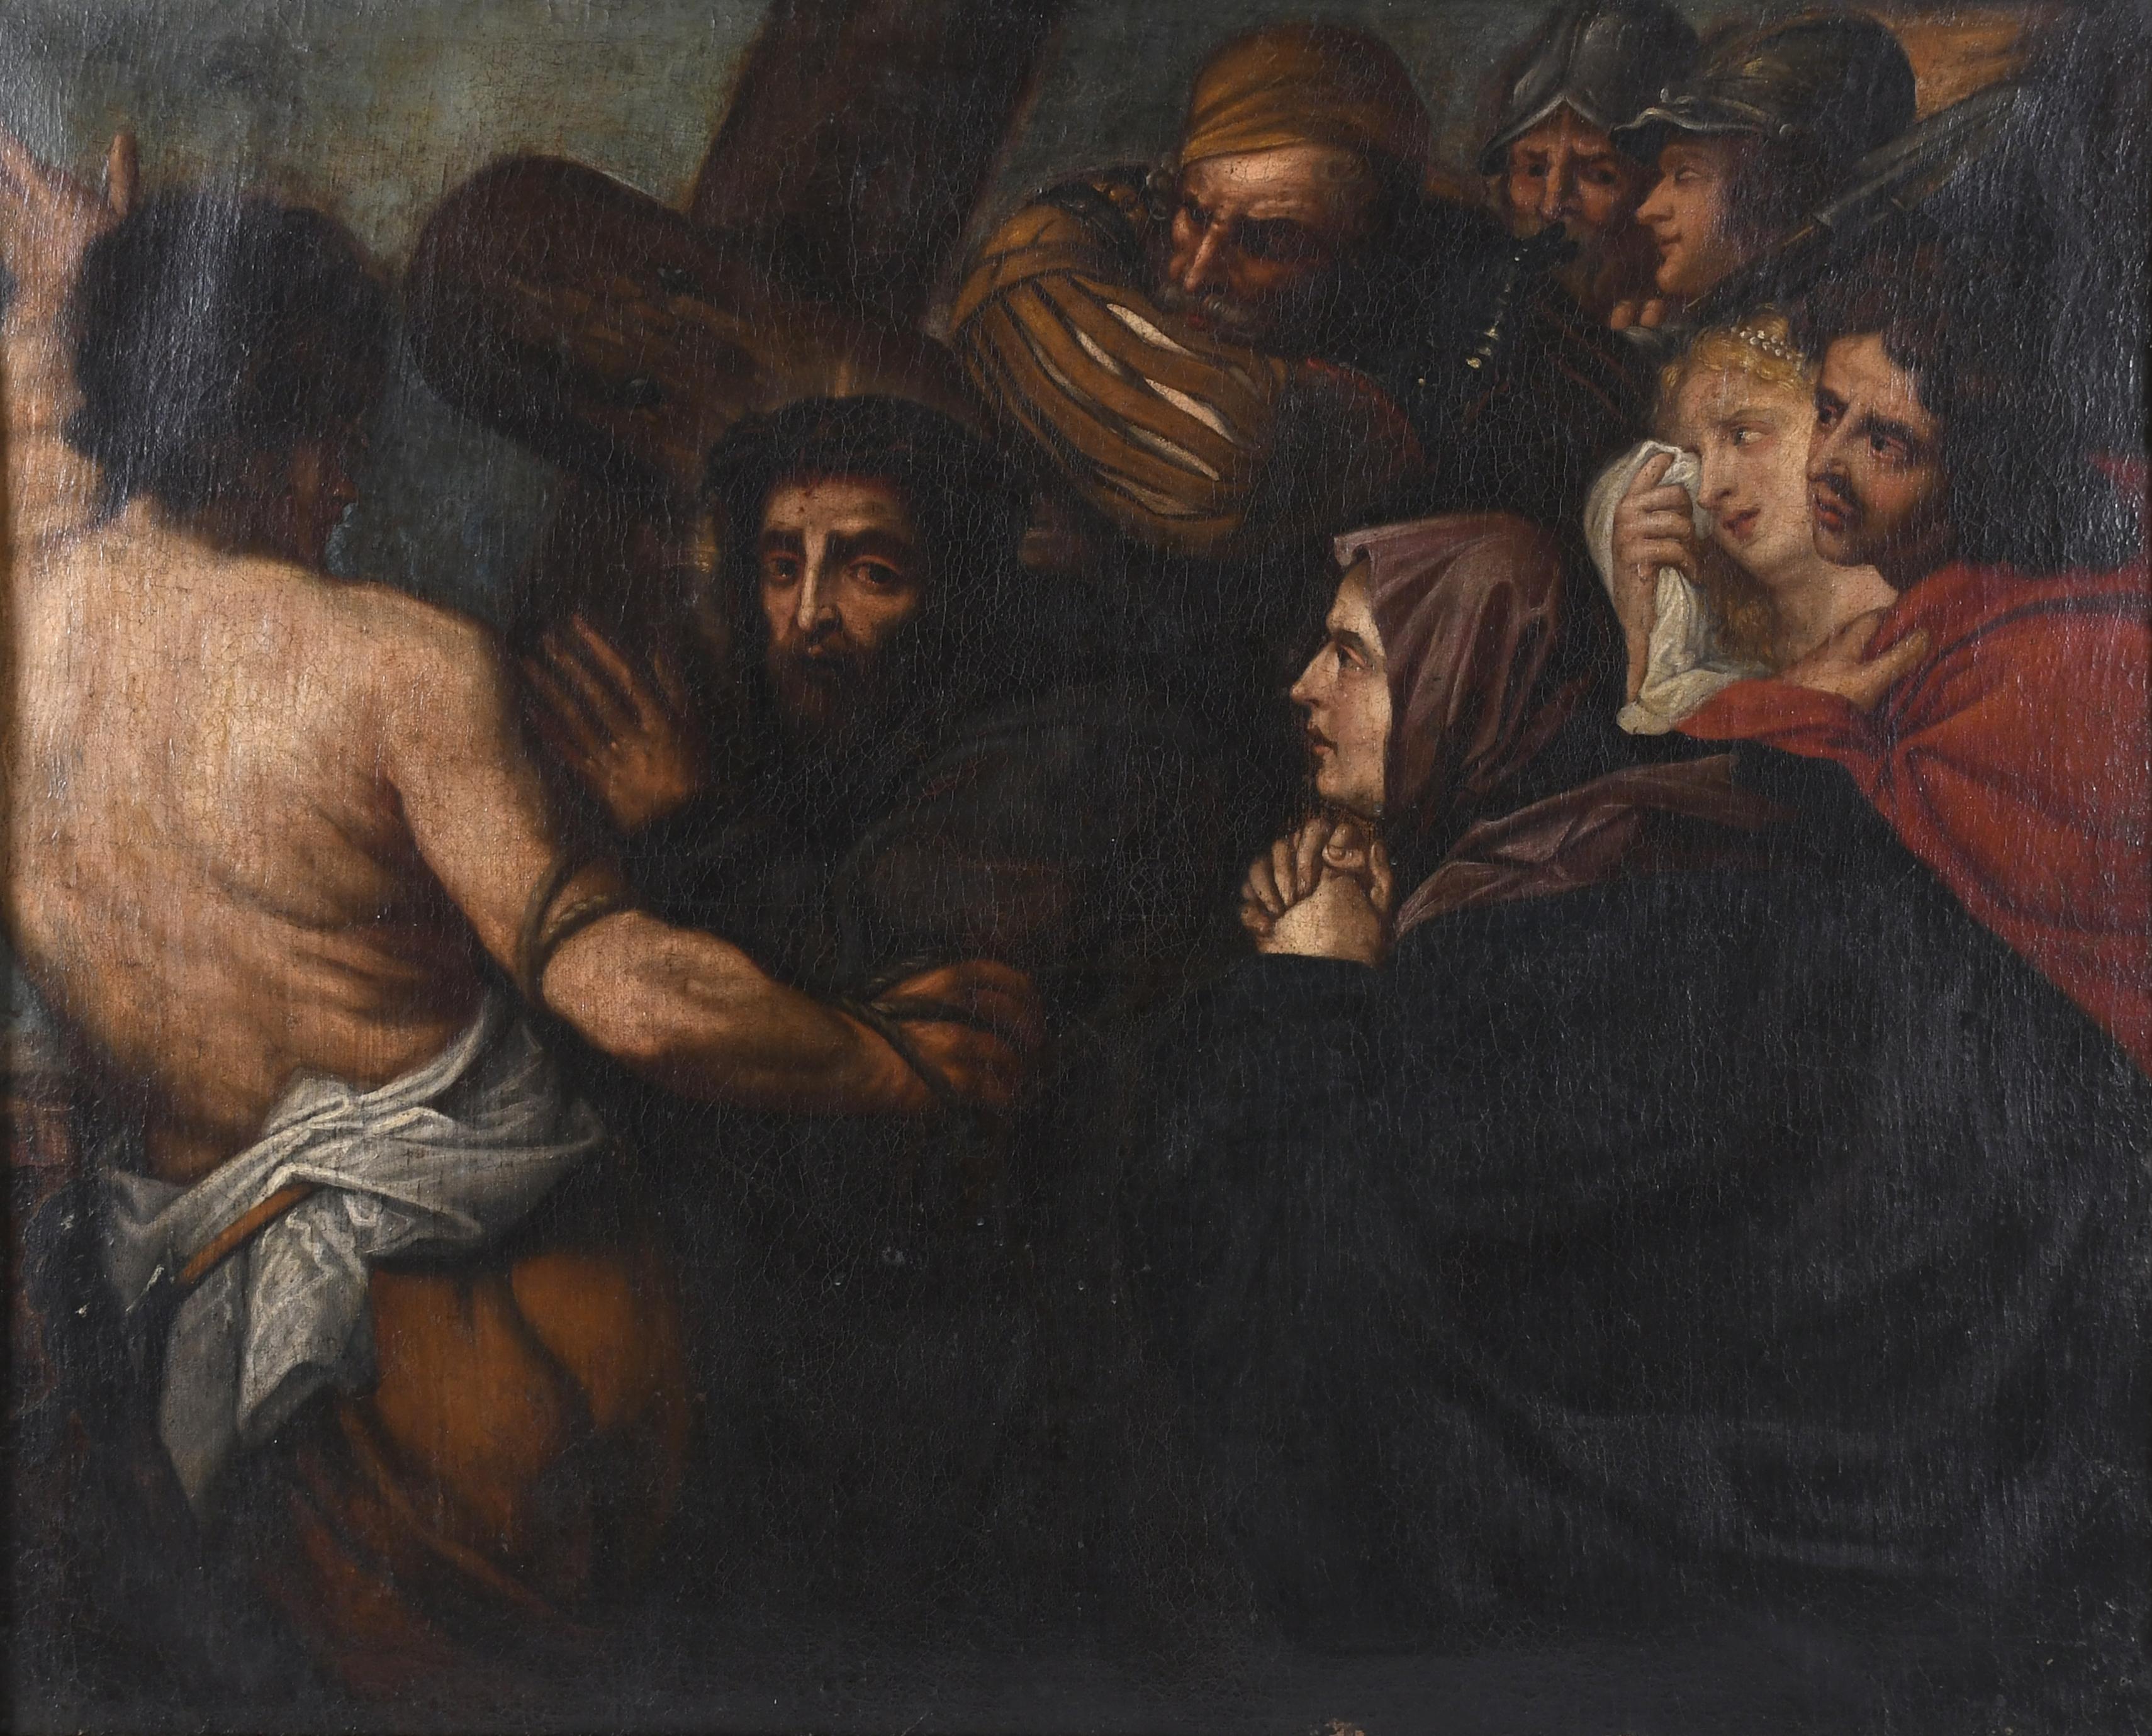 FLEMISH SCHOOL, LATE 17TH-EARLY 18TH CENTURY. "JESUS MEETS 